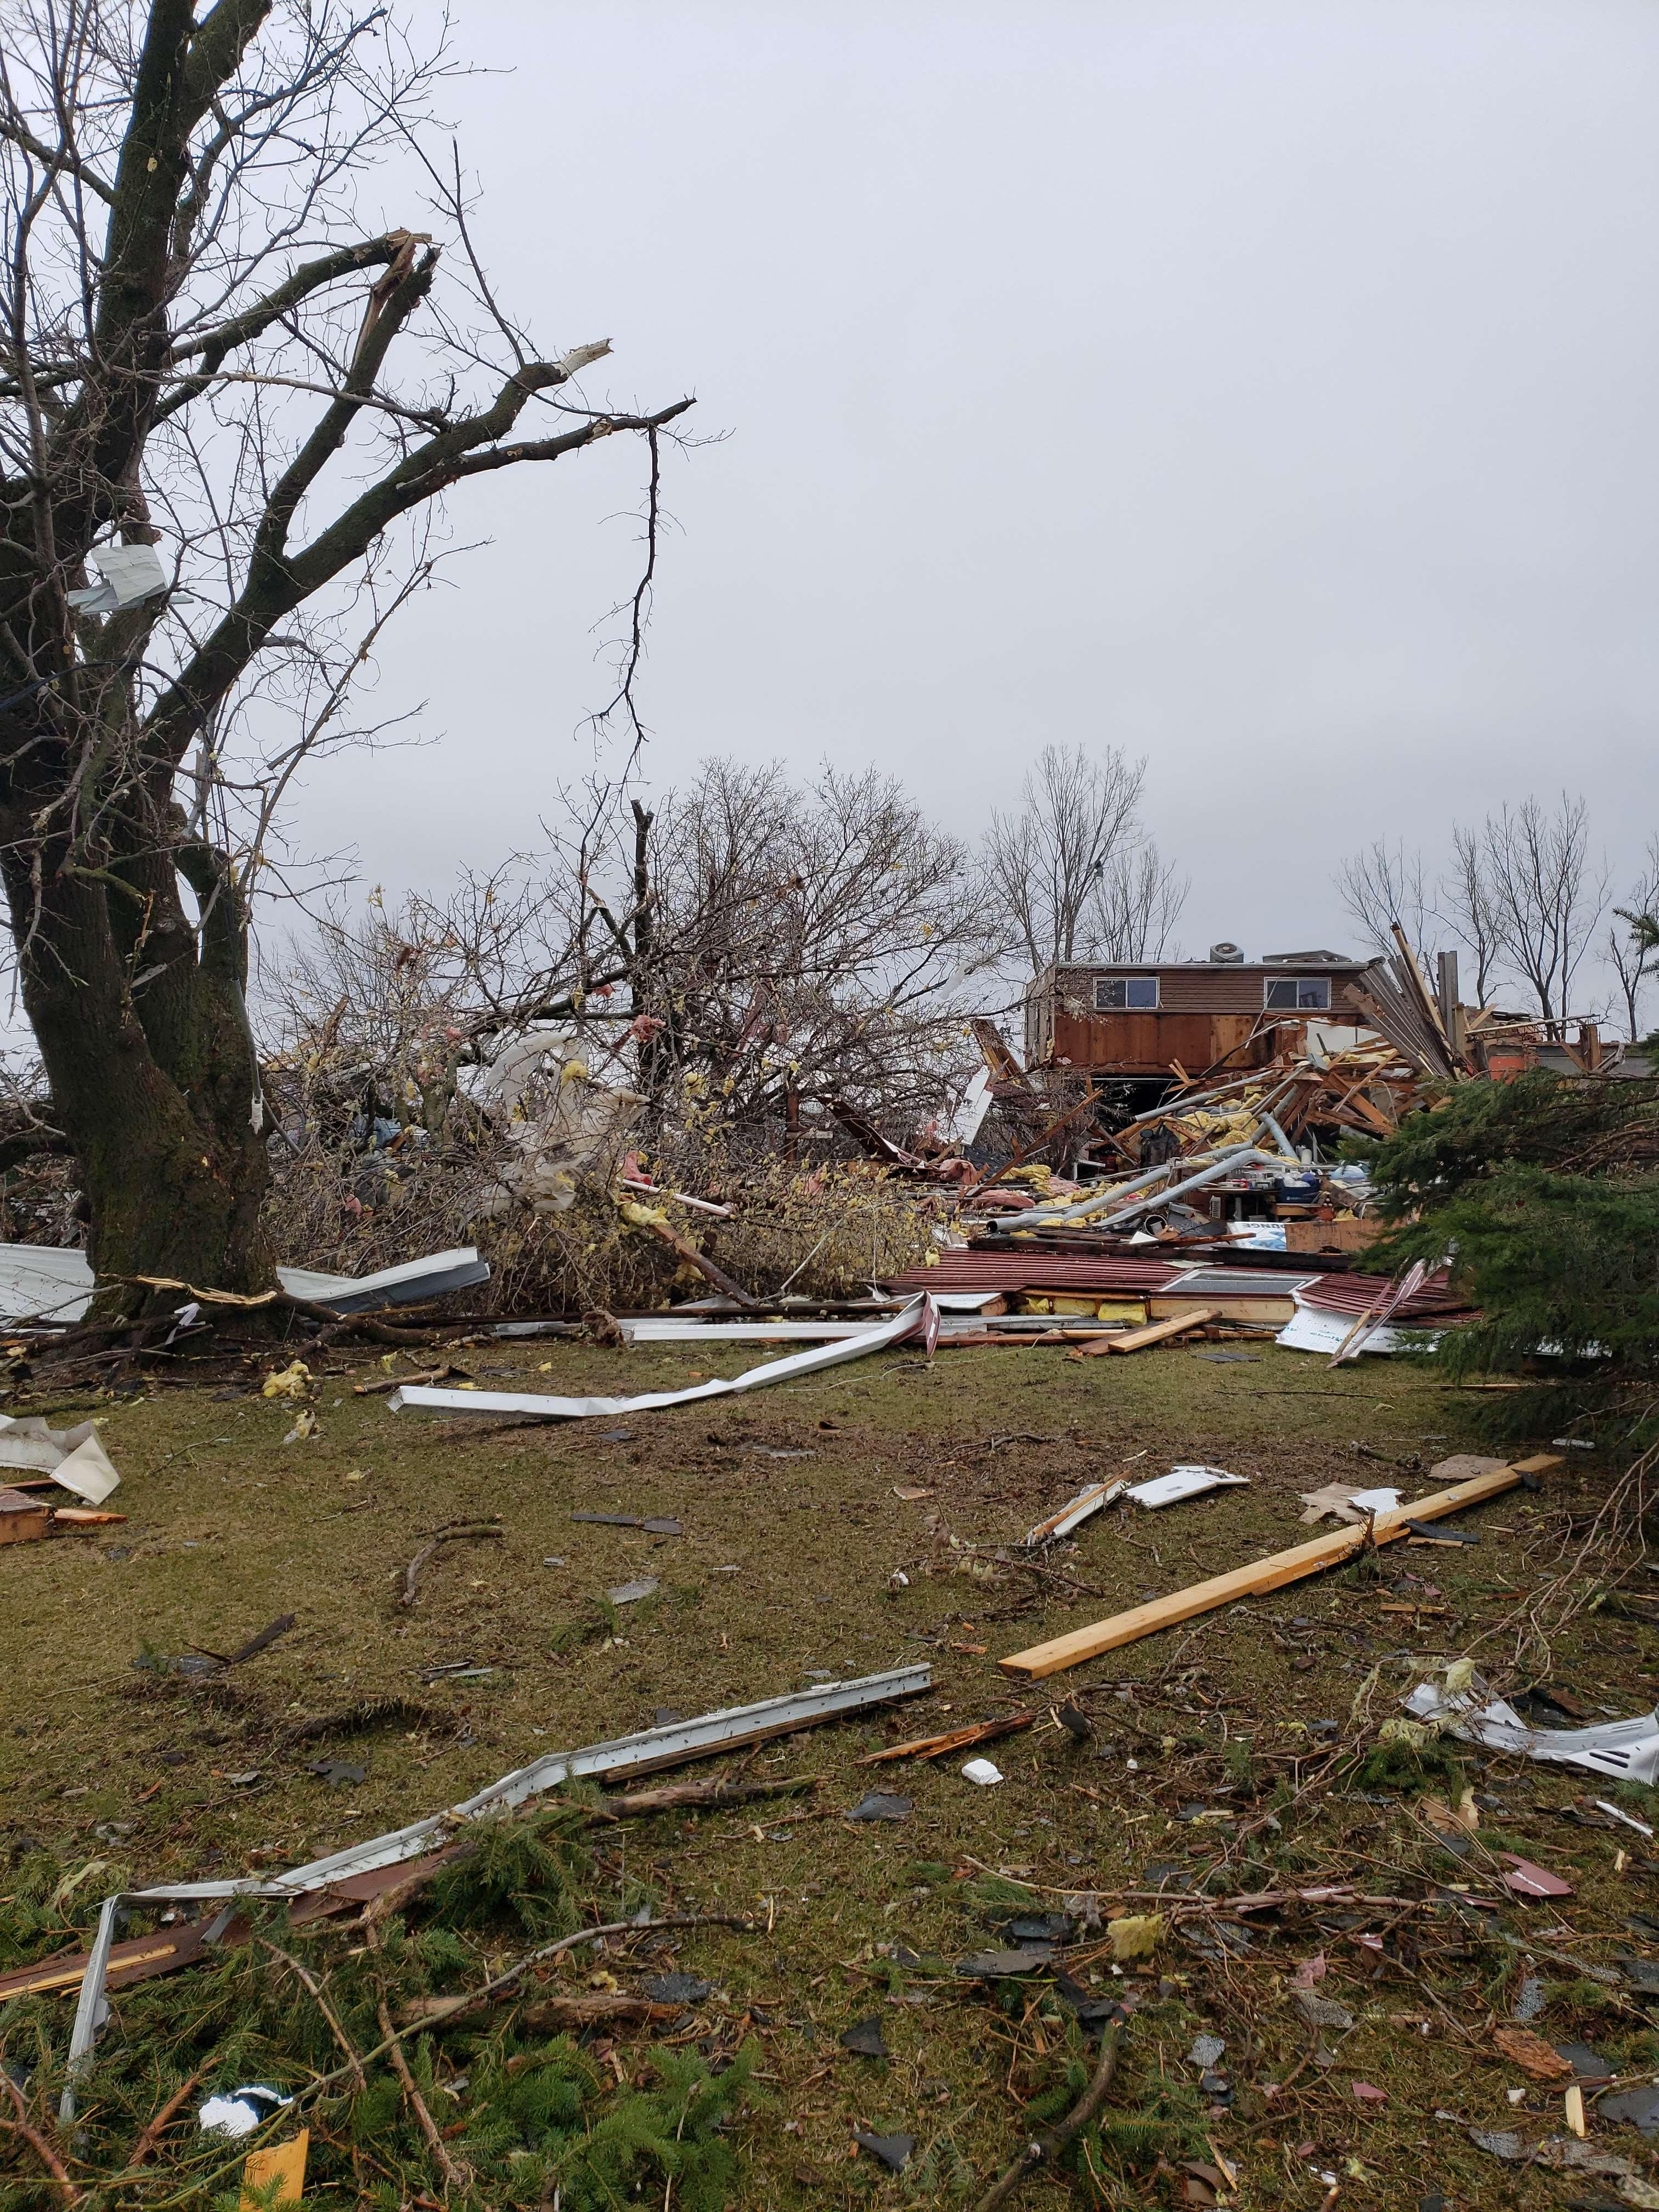 Heavy EF2 damage to a home and trees on the west side of Taopi, Minnesota.